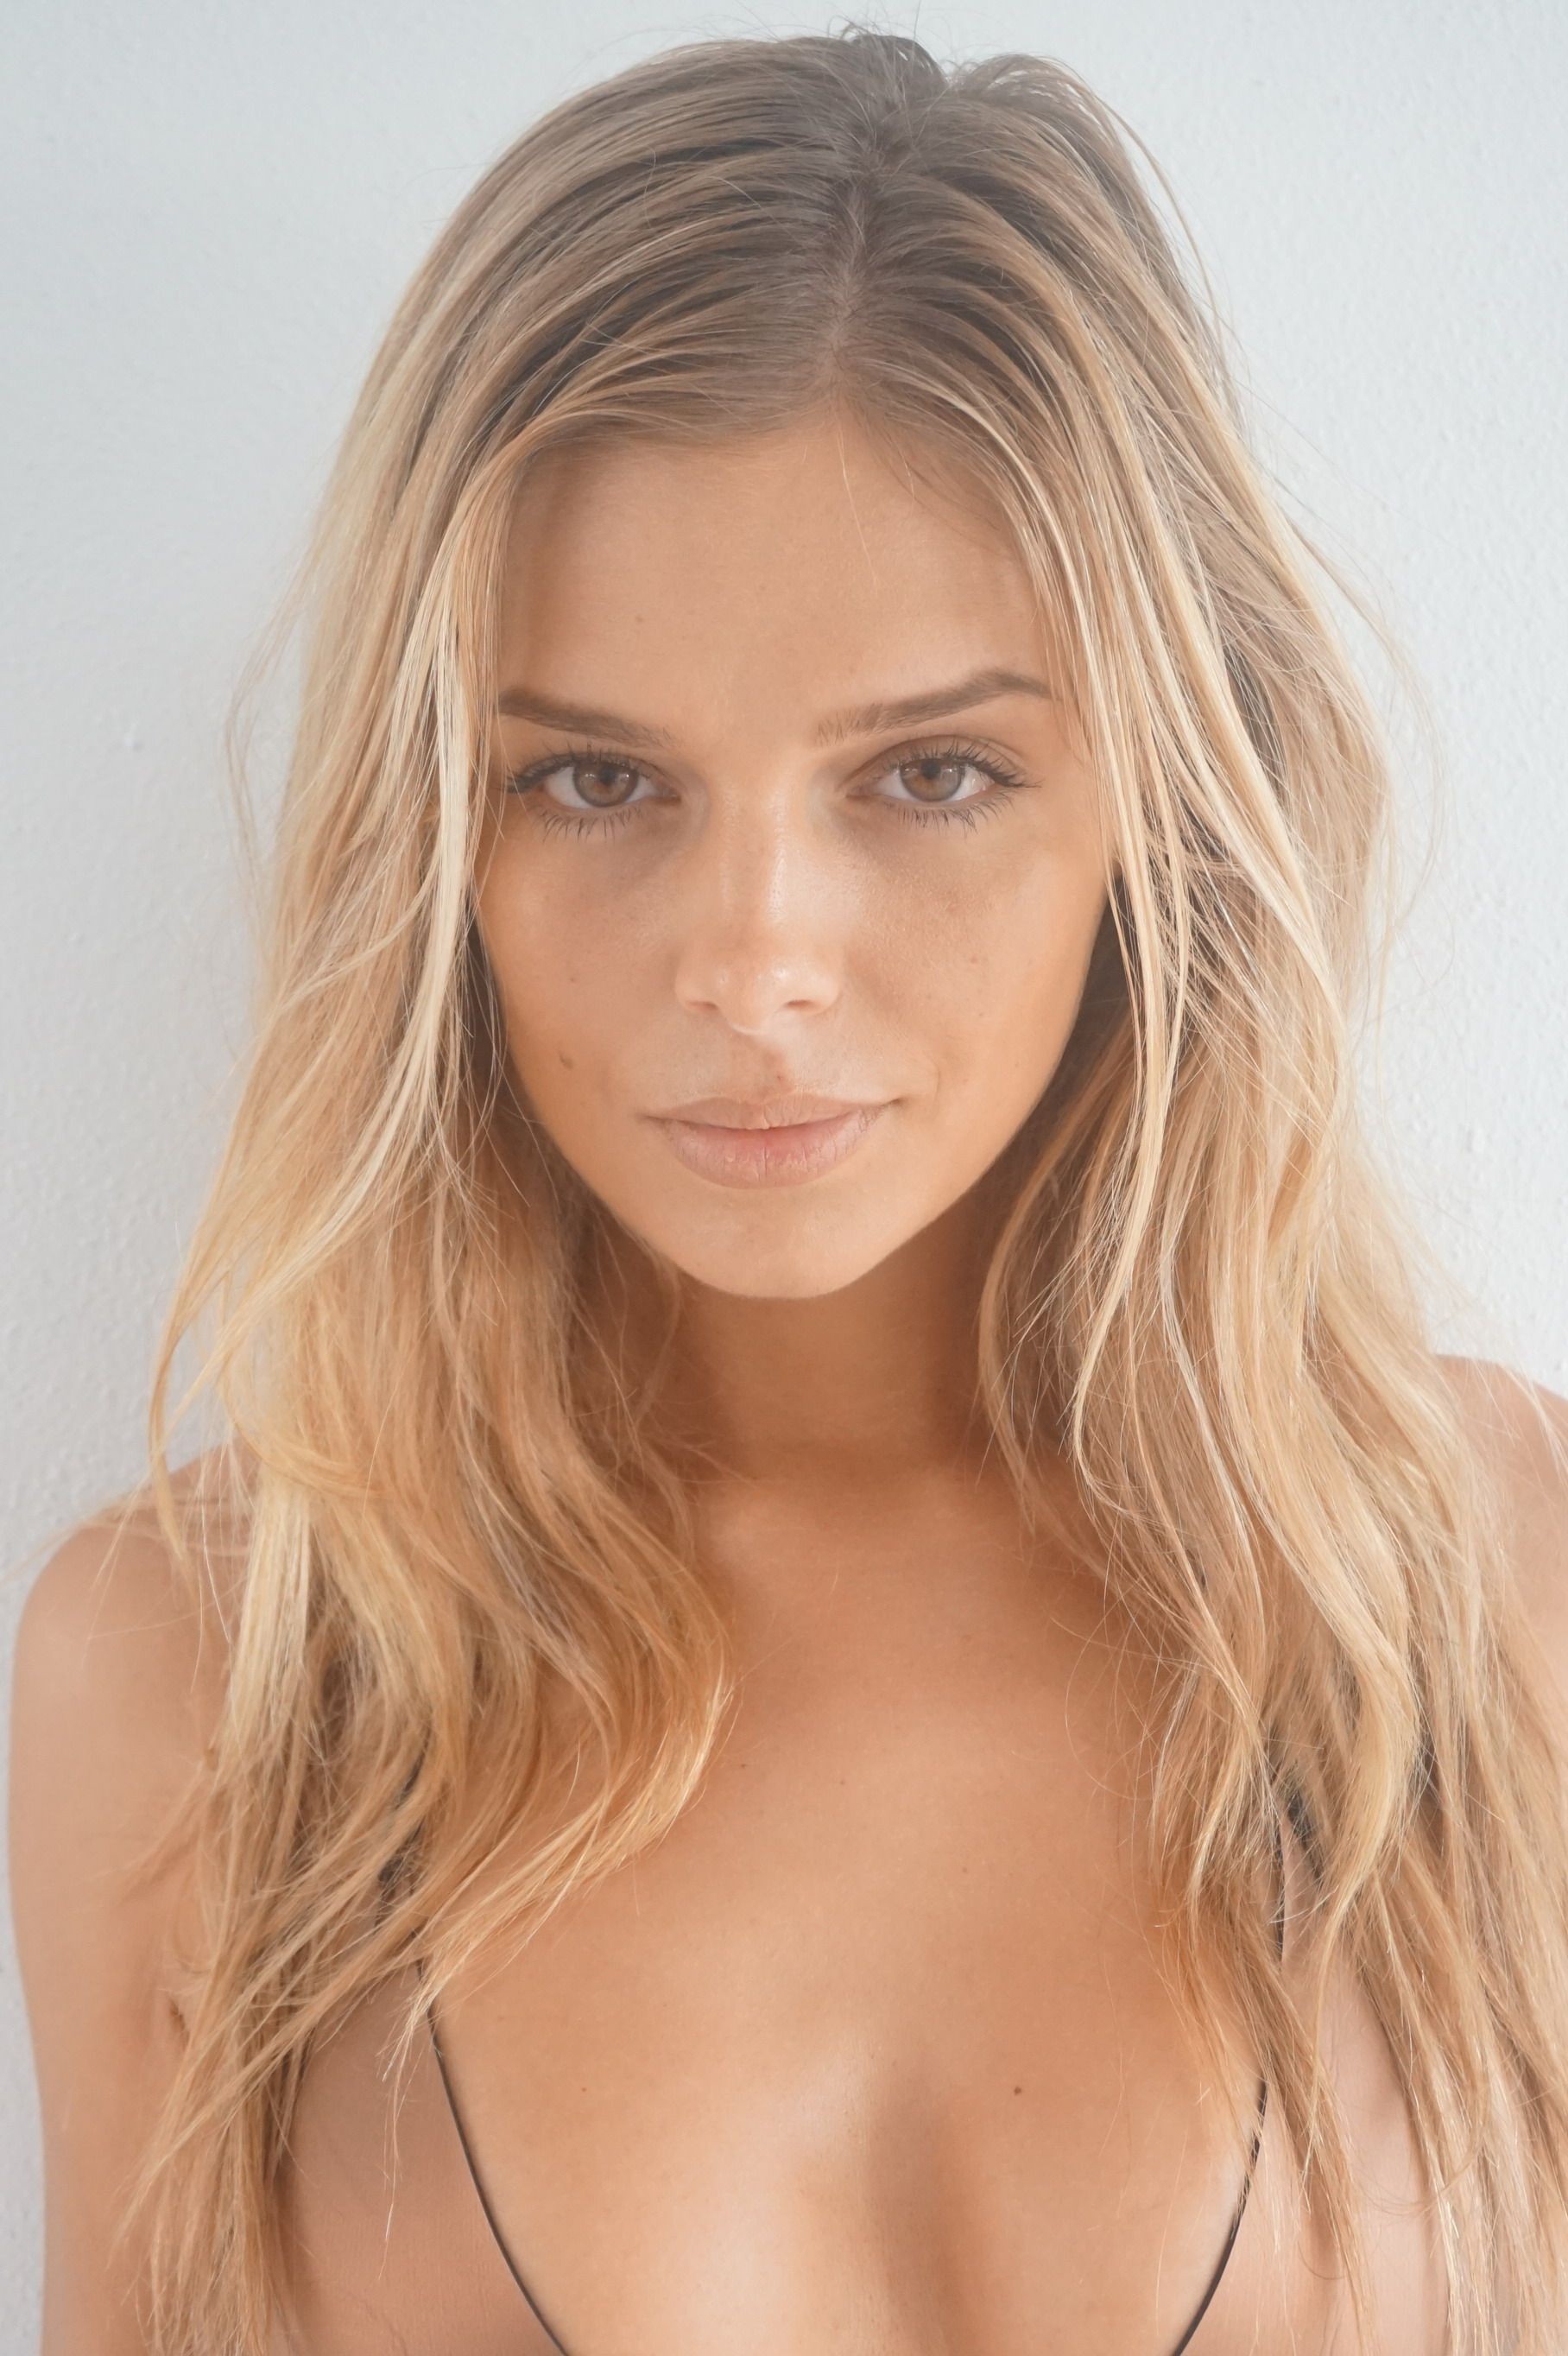 1677773995 891 Danielle Knudson Nude TheFappening 132 - Danielle Knudson Nude Leaked (Over 200 Photos!)